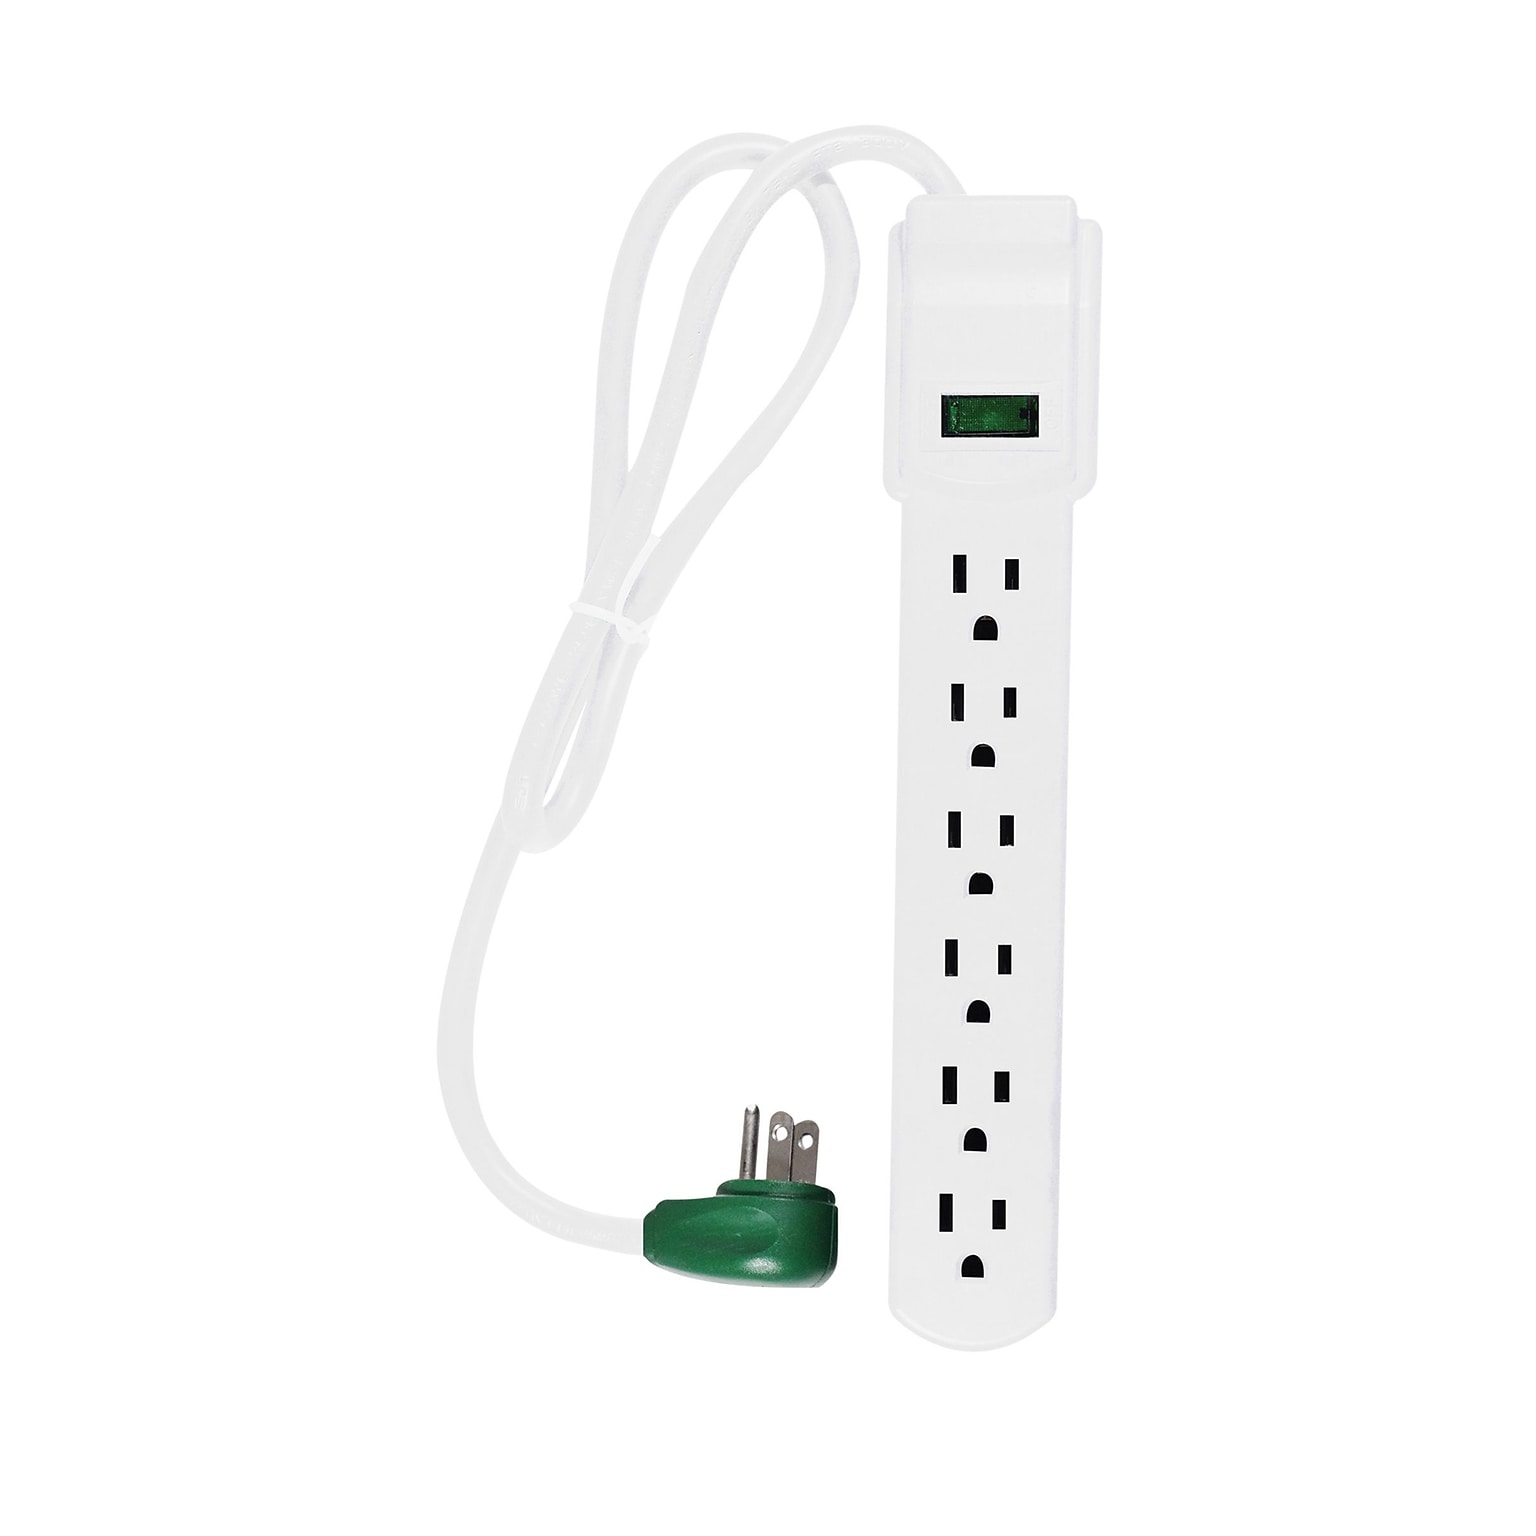 Power by GoGreen 6 Outlet Surge Protector, 2.5 cord, White, GG-16103MS